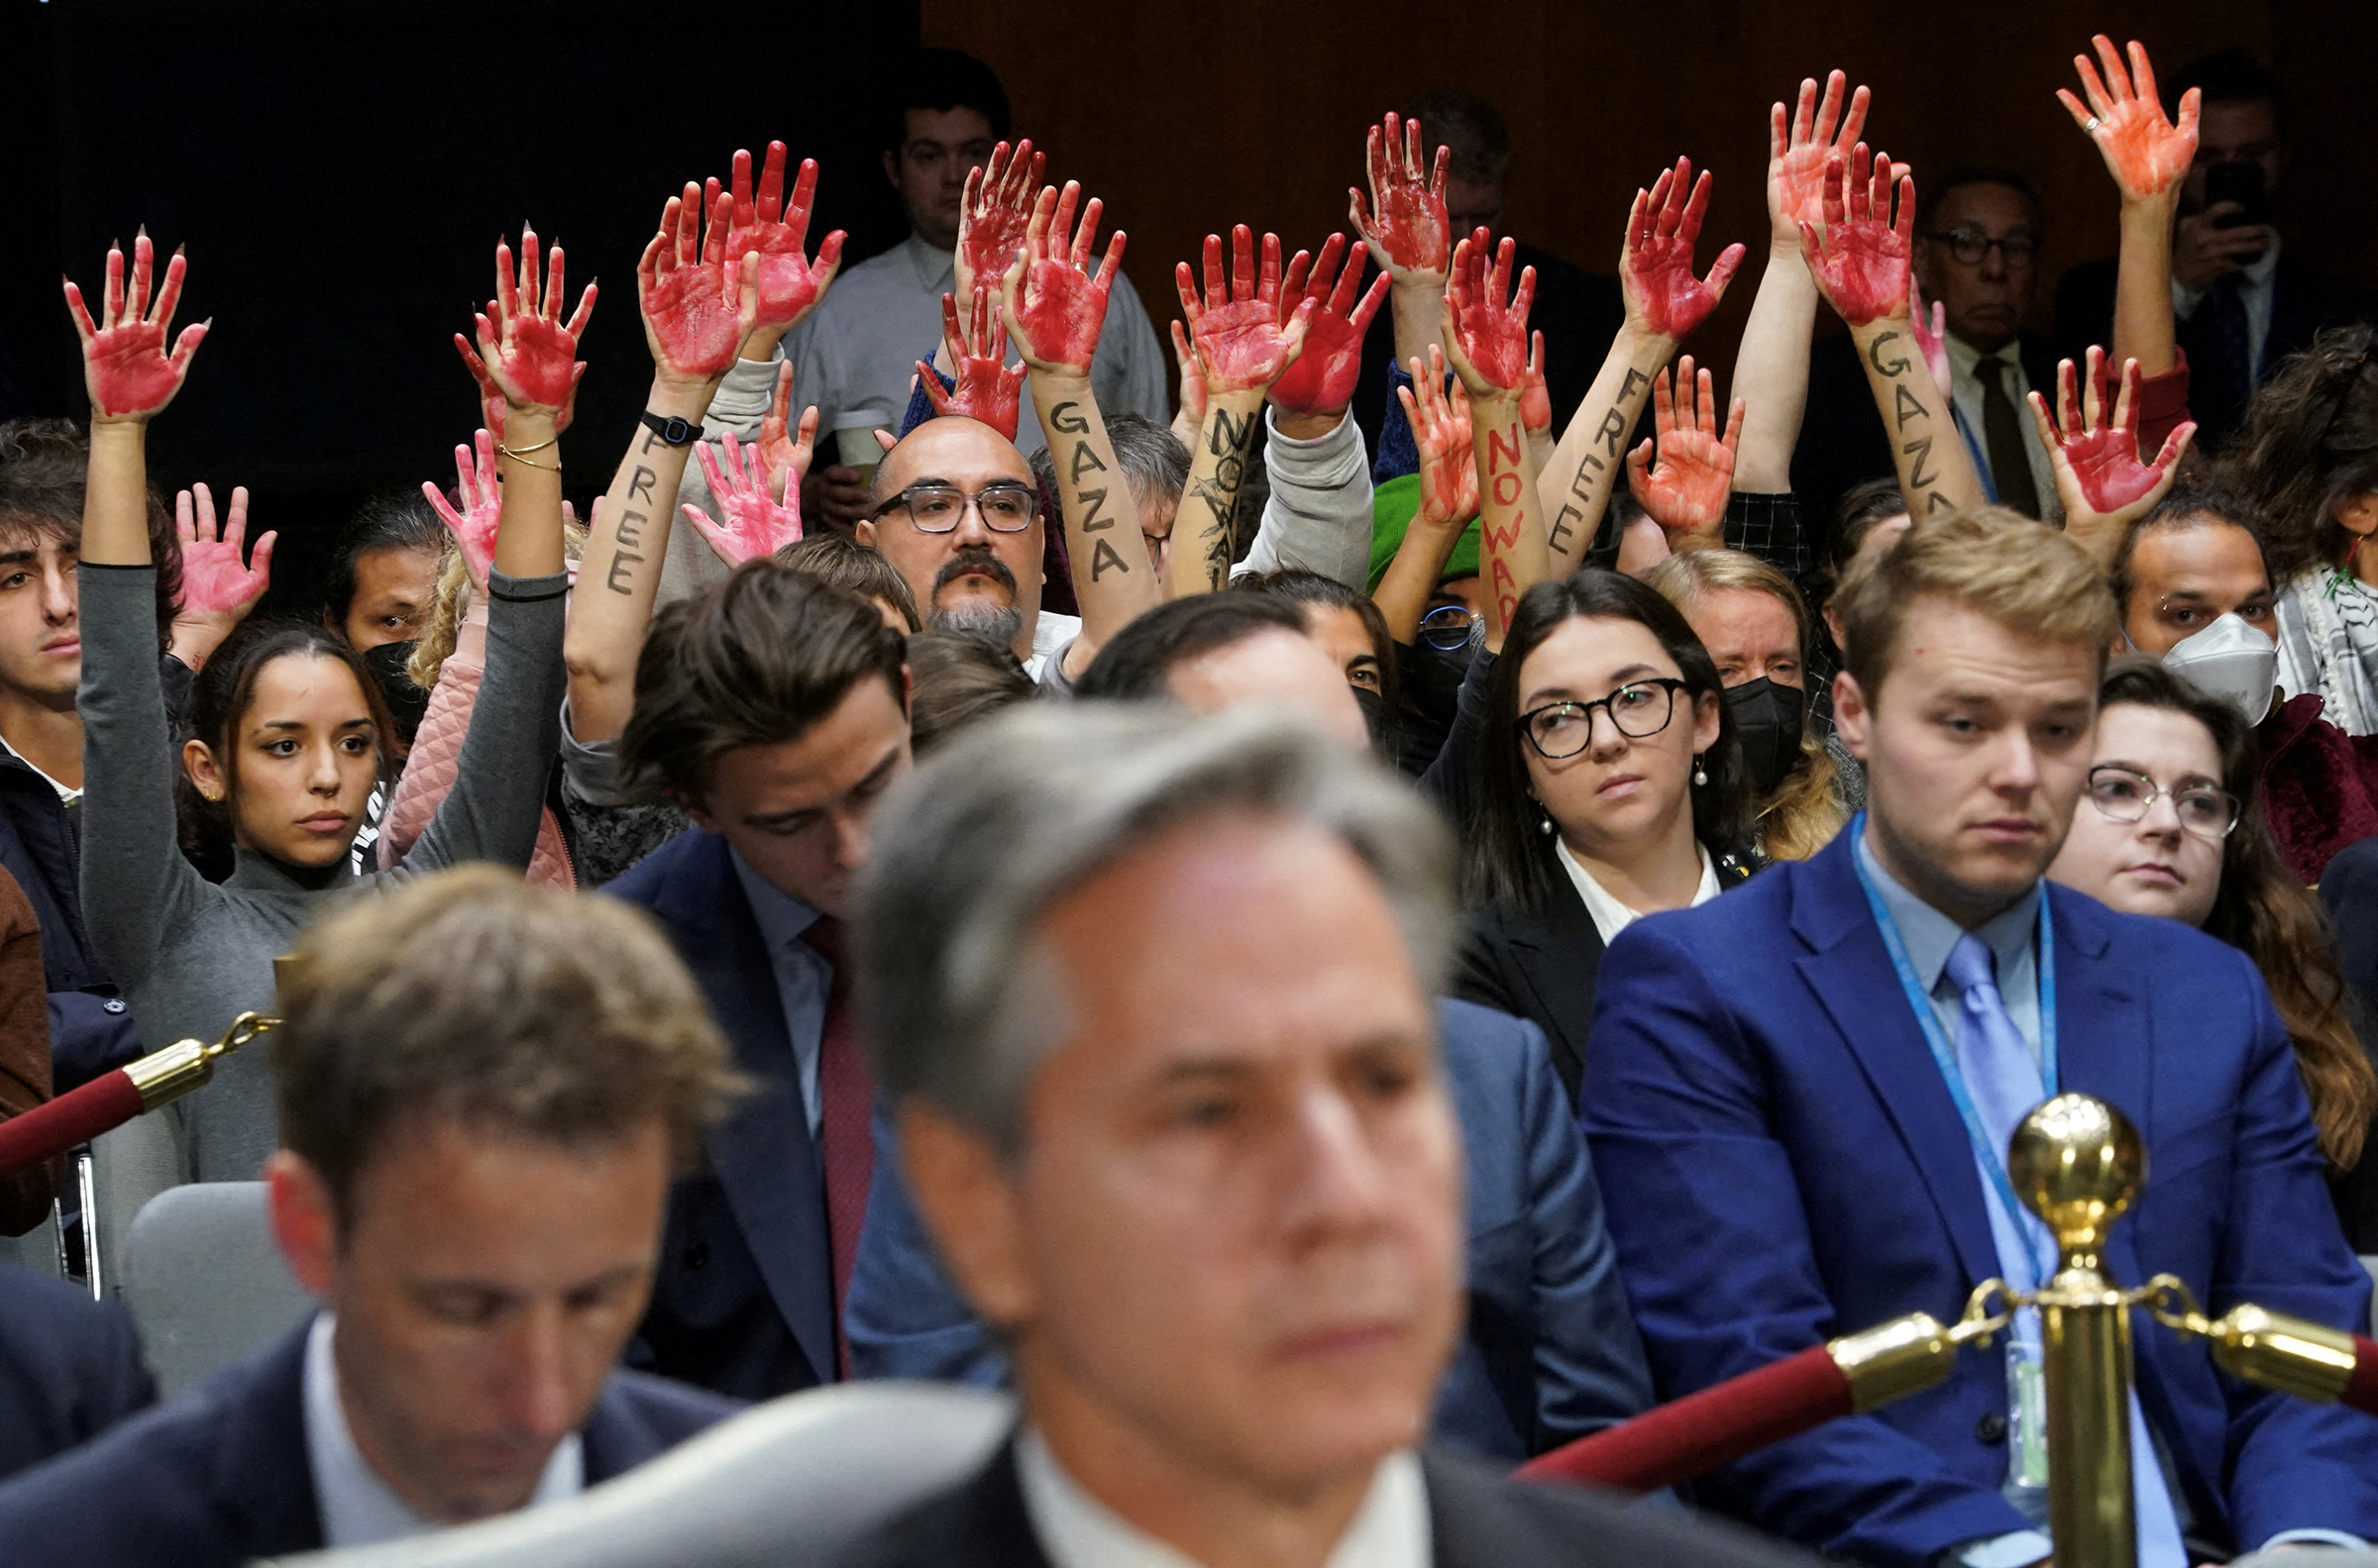 Anti-war protesters raise painted hands behind U.S. Secretary of State Antony Blinken during a Senate Appropriations Committee hearing on President Biden's $106 billion national security supplemental funding request to support Israel and Ukraine, as well as bolster border security, on Capitol Hill in Washington, U.S., on Oct. 31, 2023.